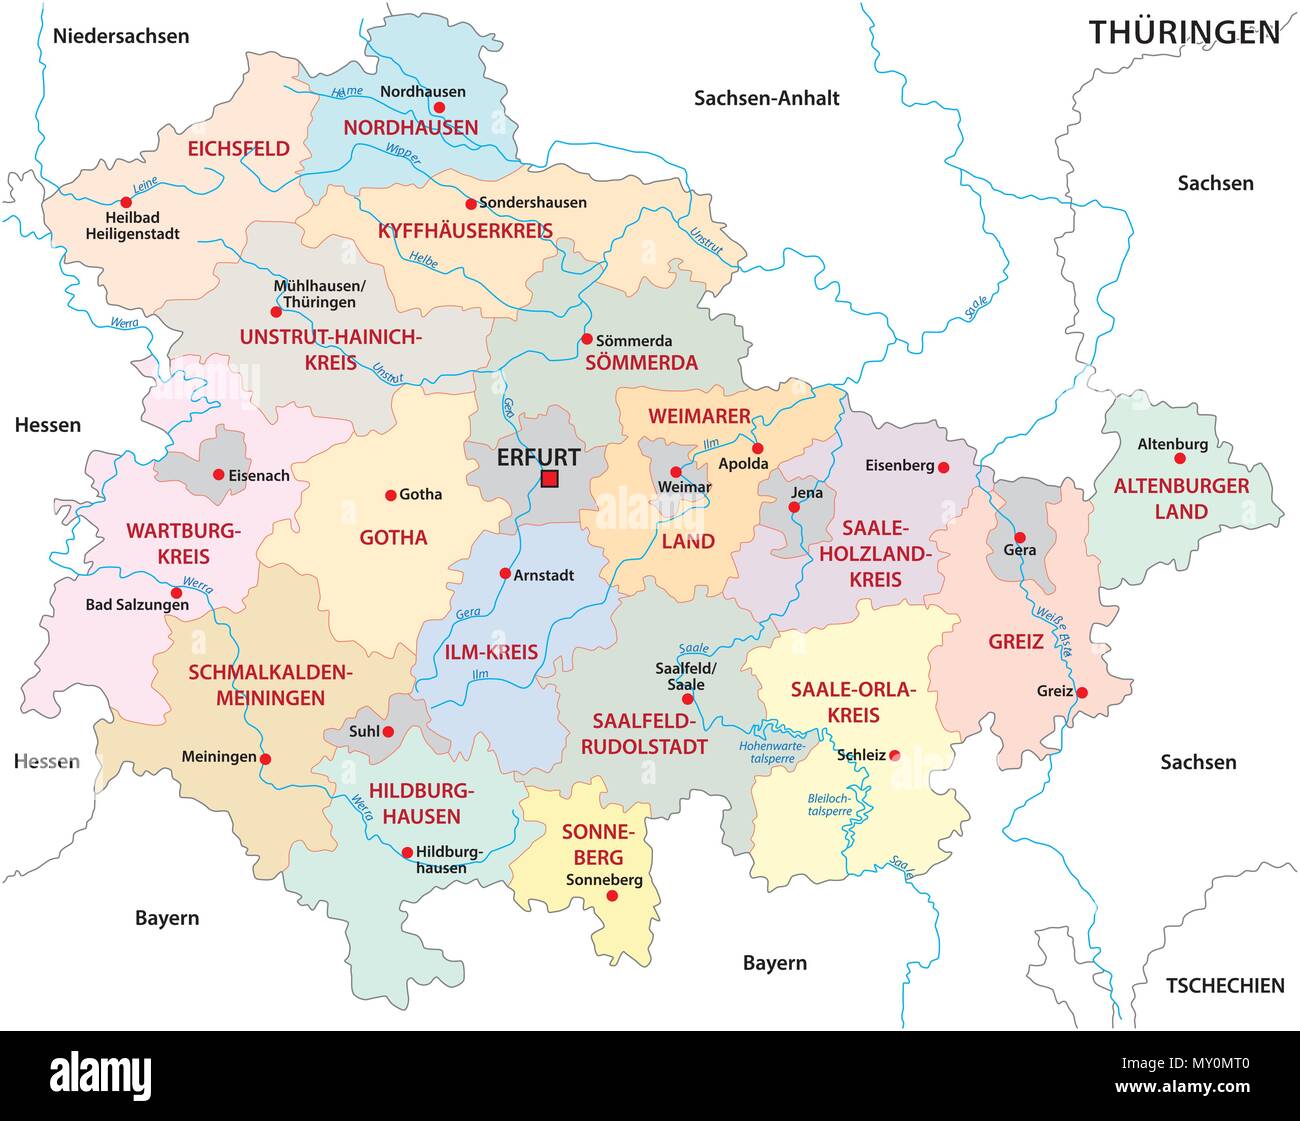 thuringia administrative and political vector map Stock Vector